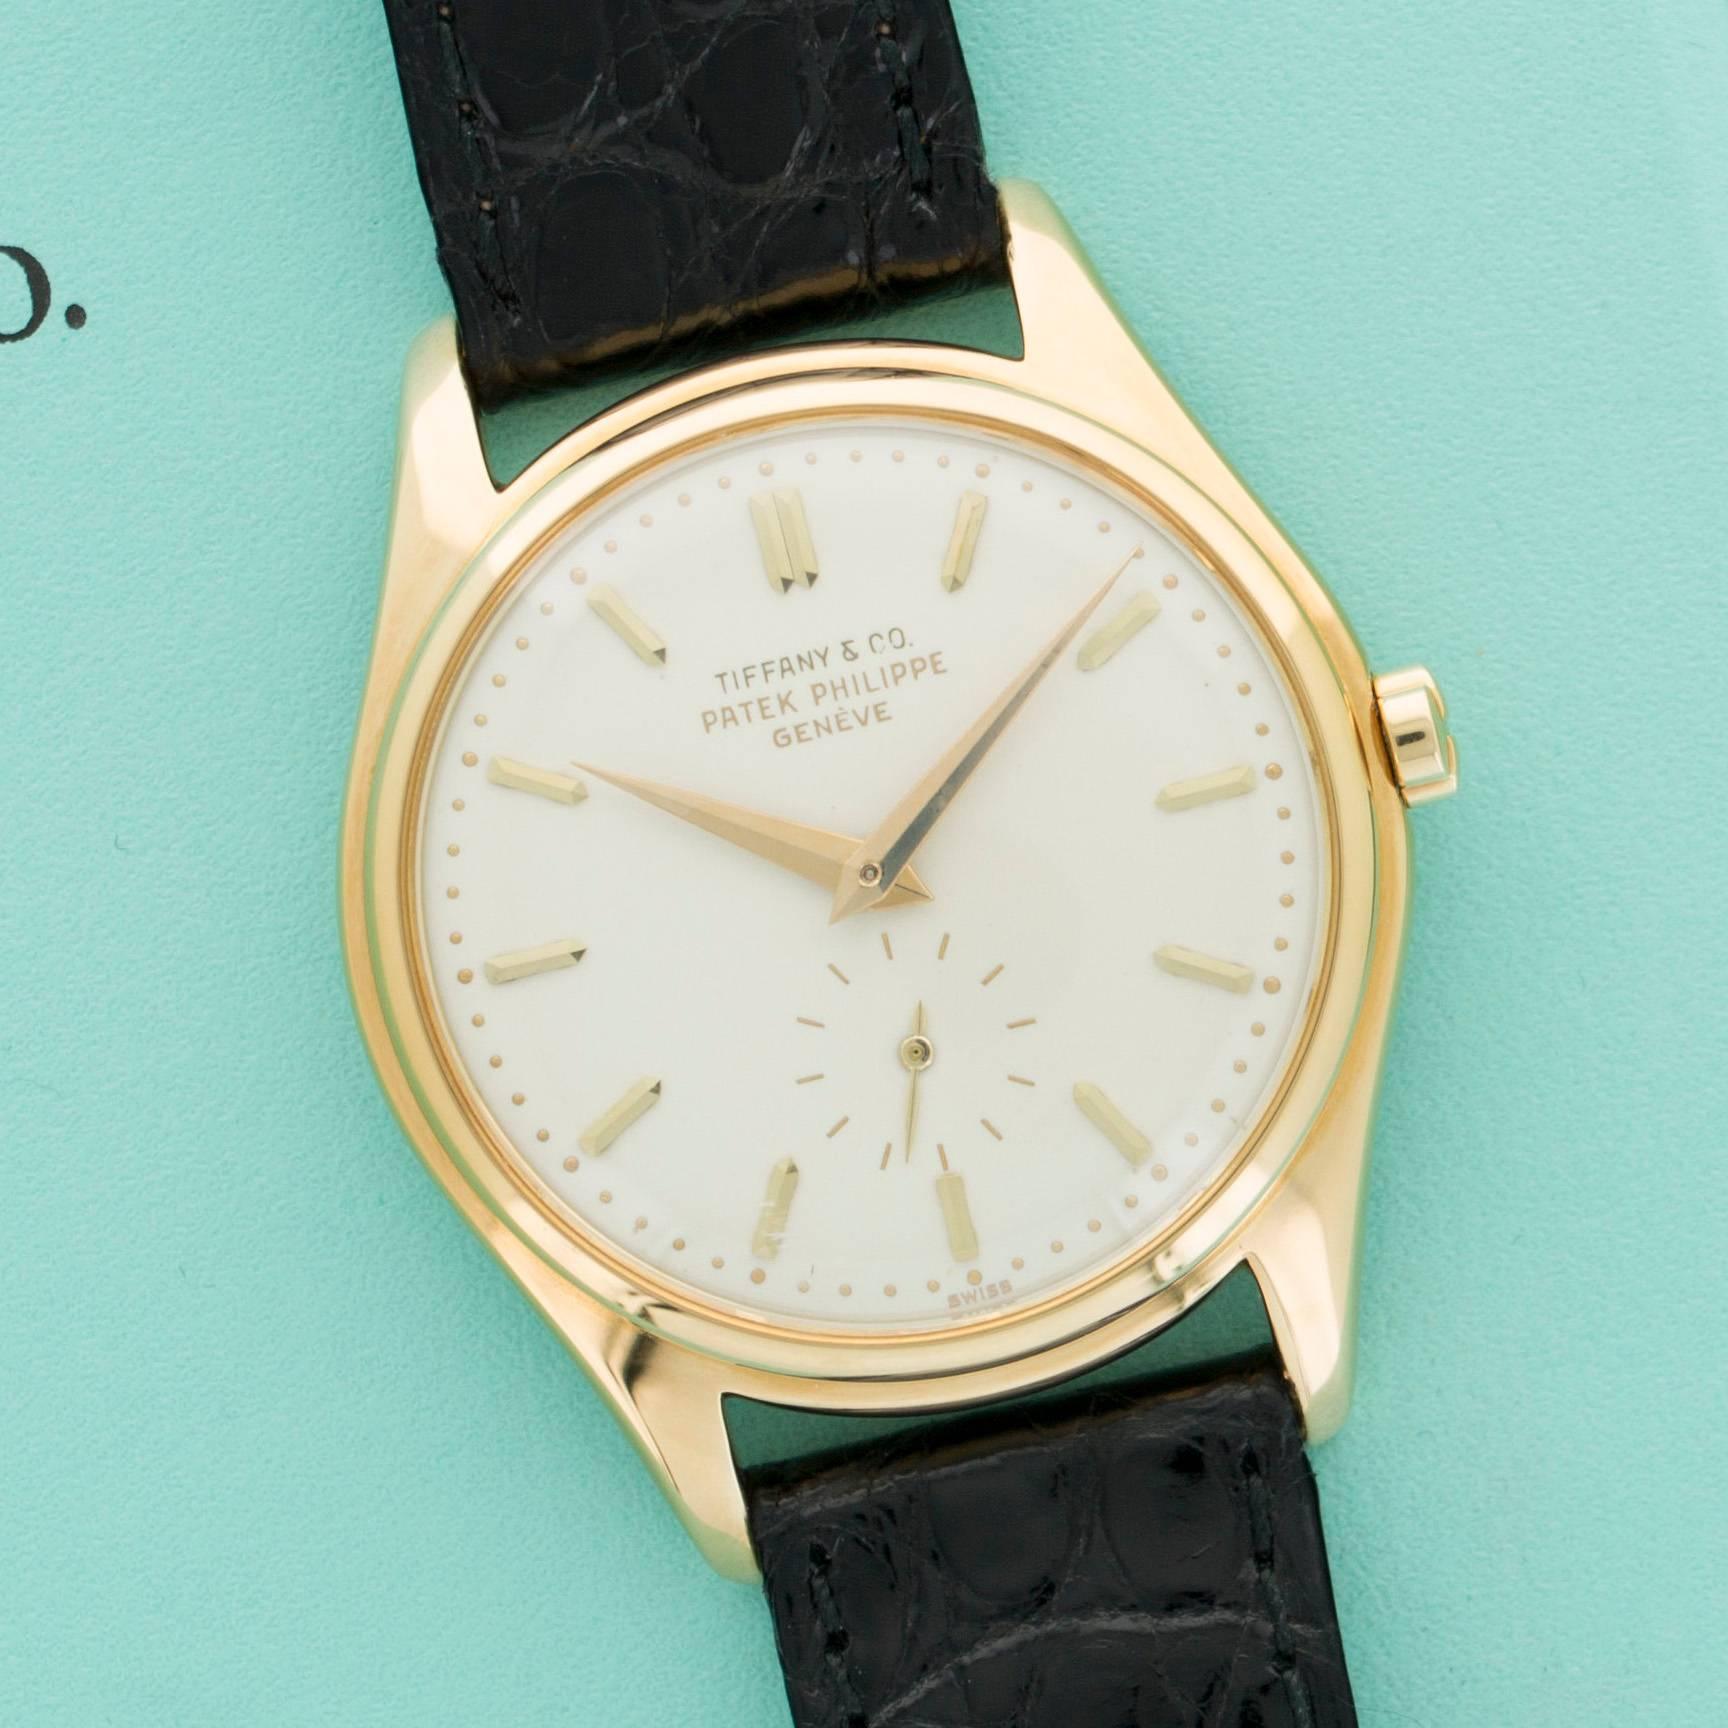 This exceptionally rare Patek Philippe Calatrava, ref. 2526 has a beautiful, excellent condition double signed Tiffany & Company dial. The case is also in impeccable condition, with clear hallmarks and full lugs. Finding a nice 2526 is rare